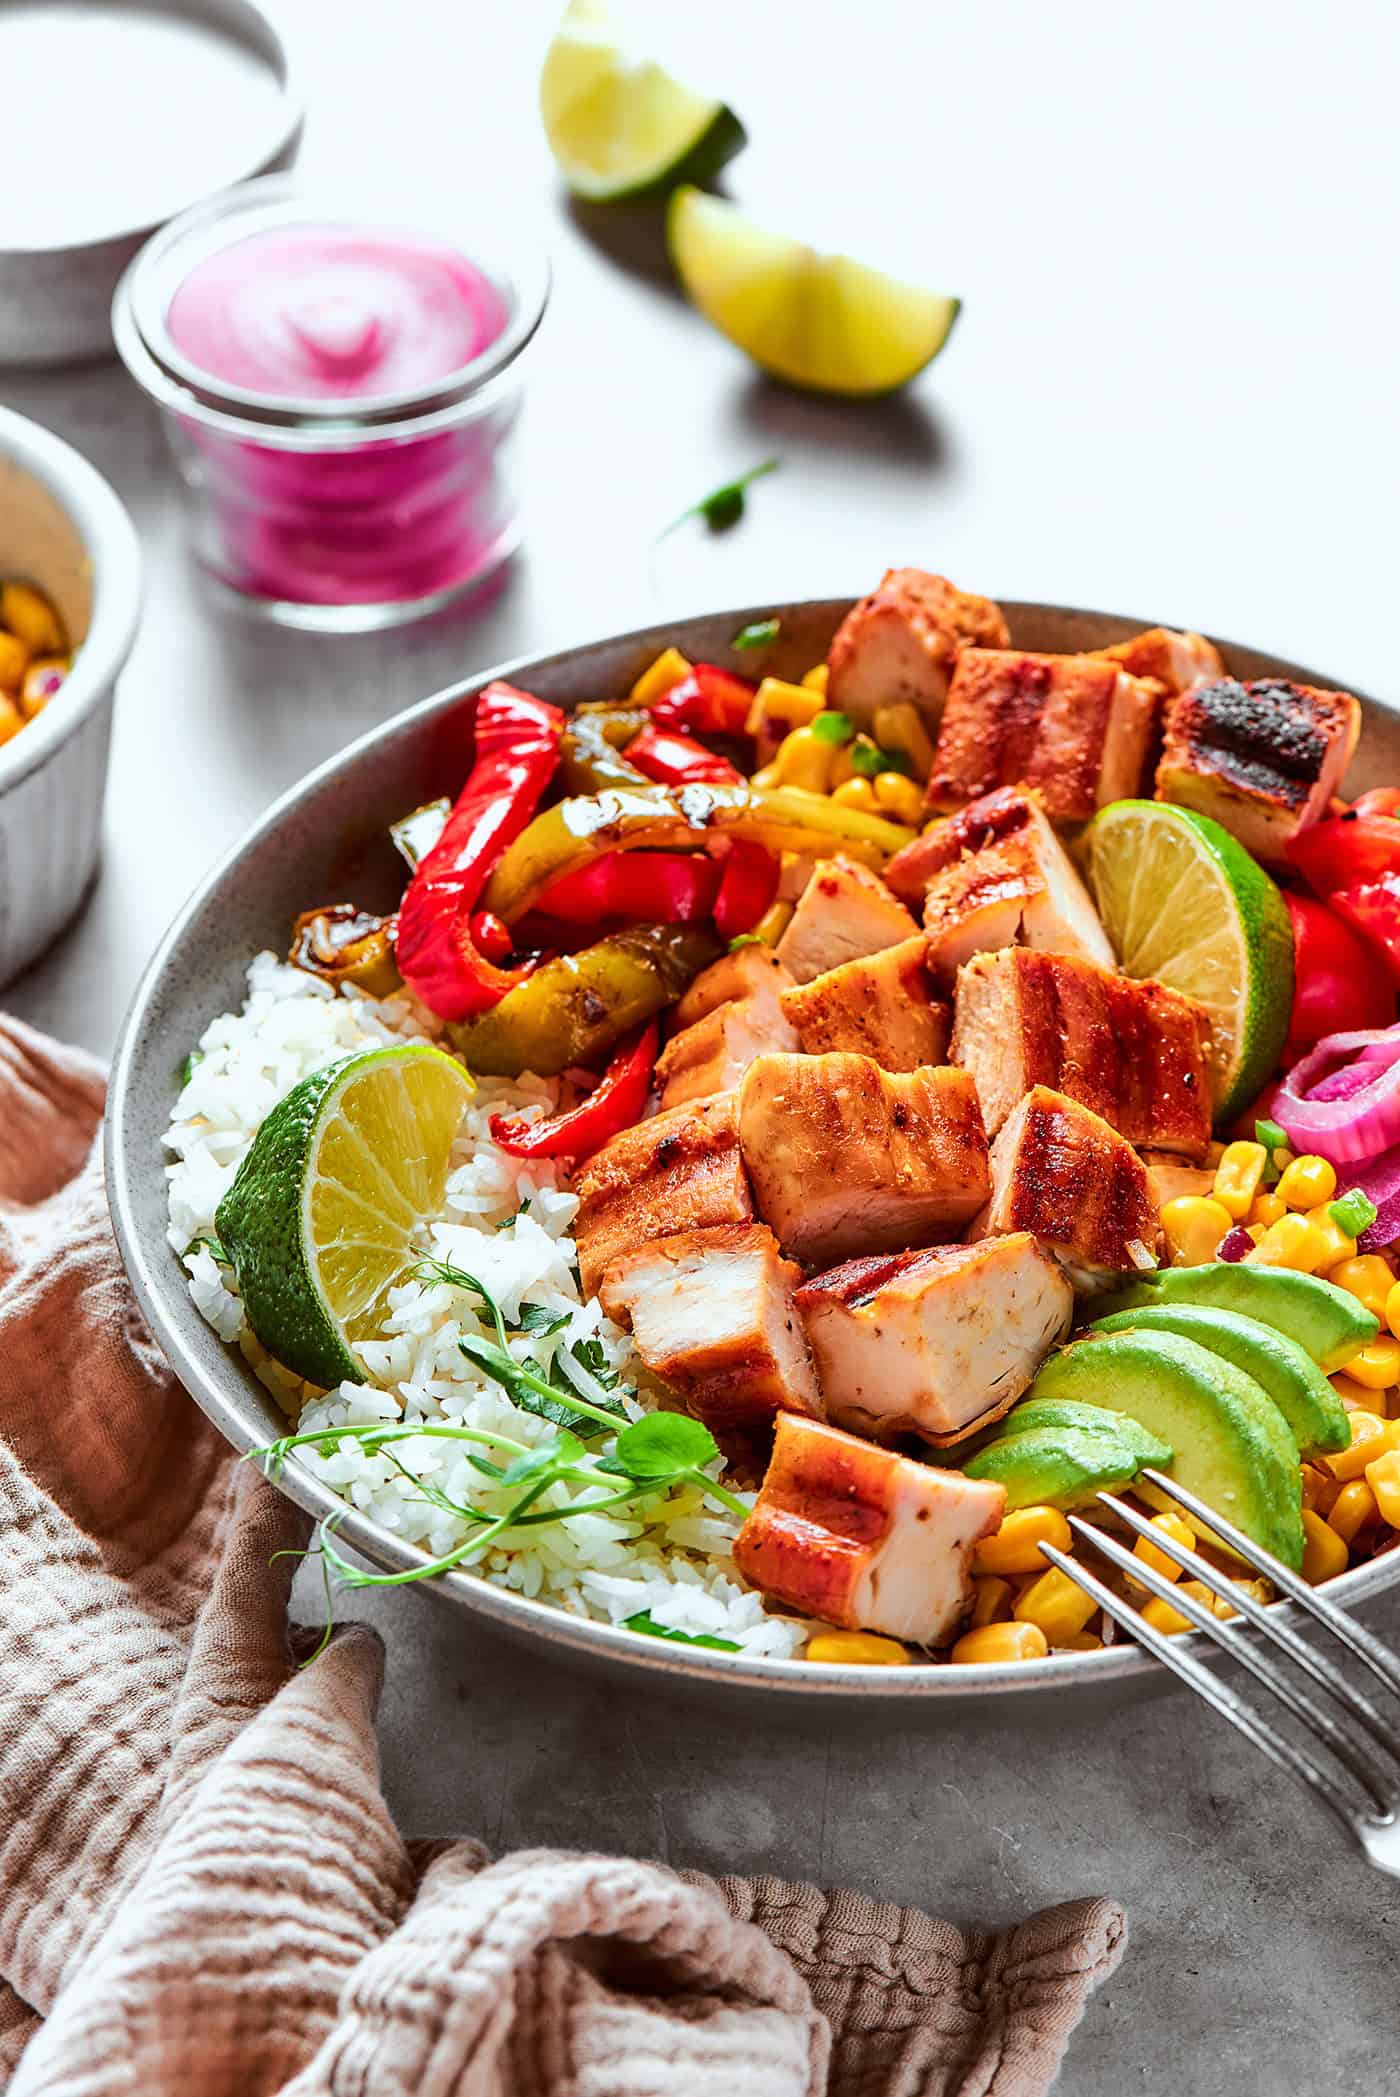 a fajita bowl with rice, chicken, corn salsa, pickled red onions, peppers, and avocado